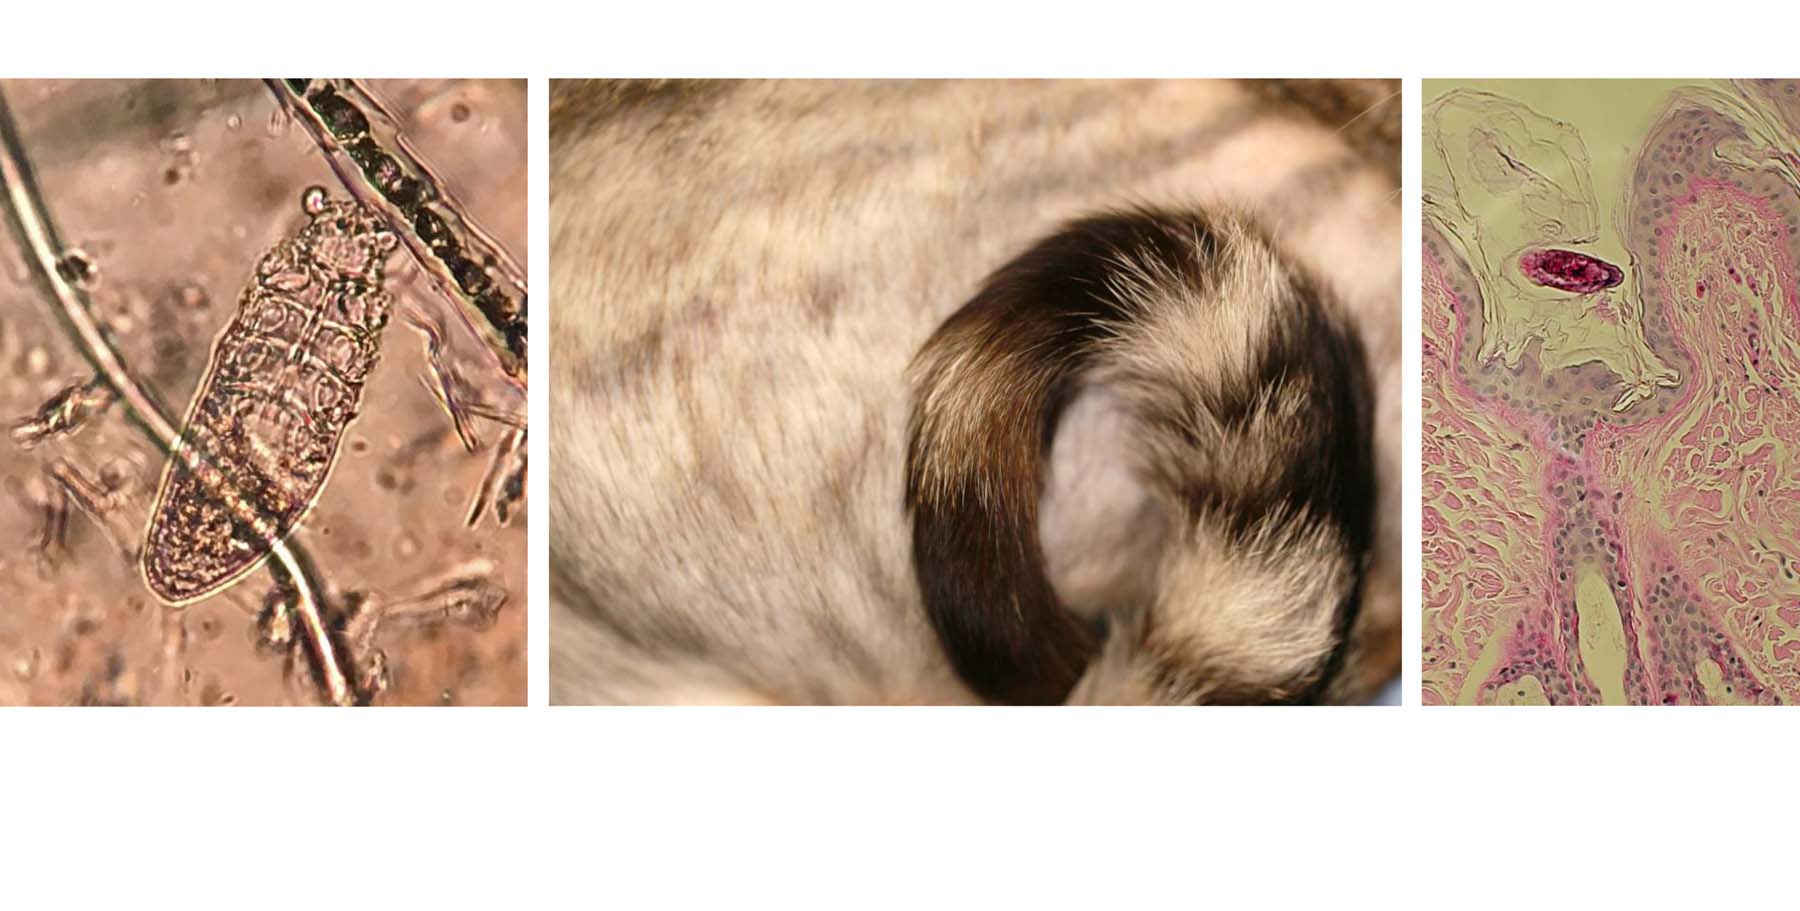 Rare Demodex Gatoi Infestation: Self-Traumatic Alopecia, Adult Mite found by Skin Scraping & subsequent Biopsy Review (previously missed by Pathologist), Bengal Cat